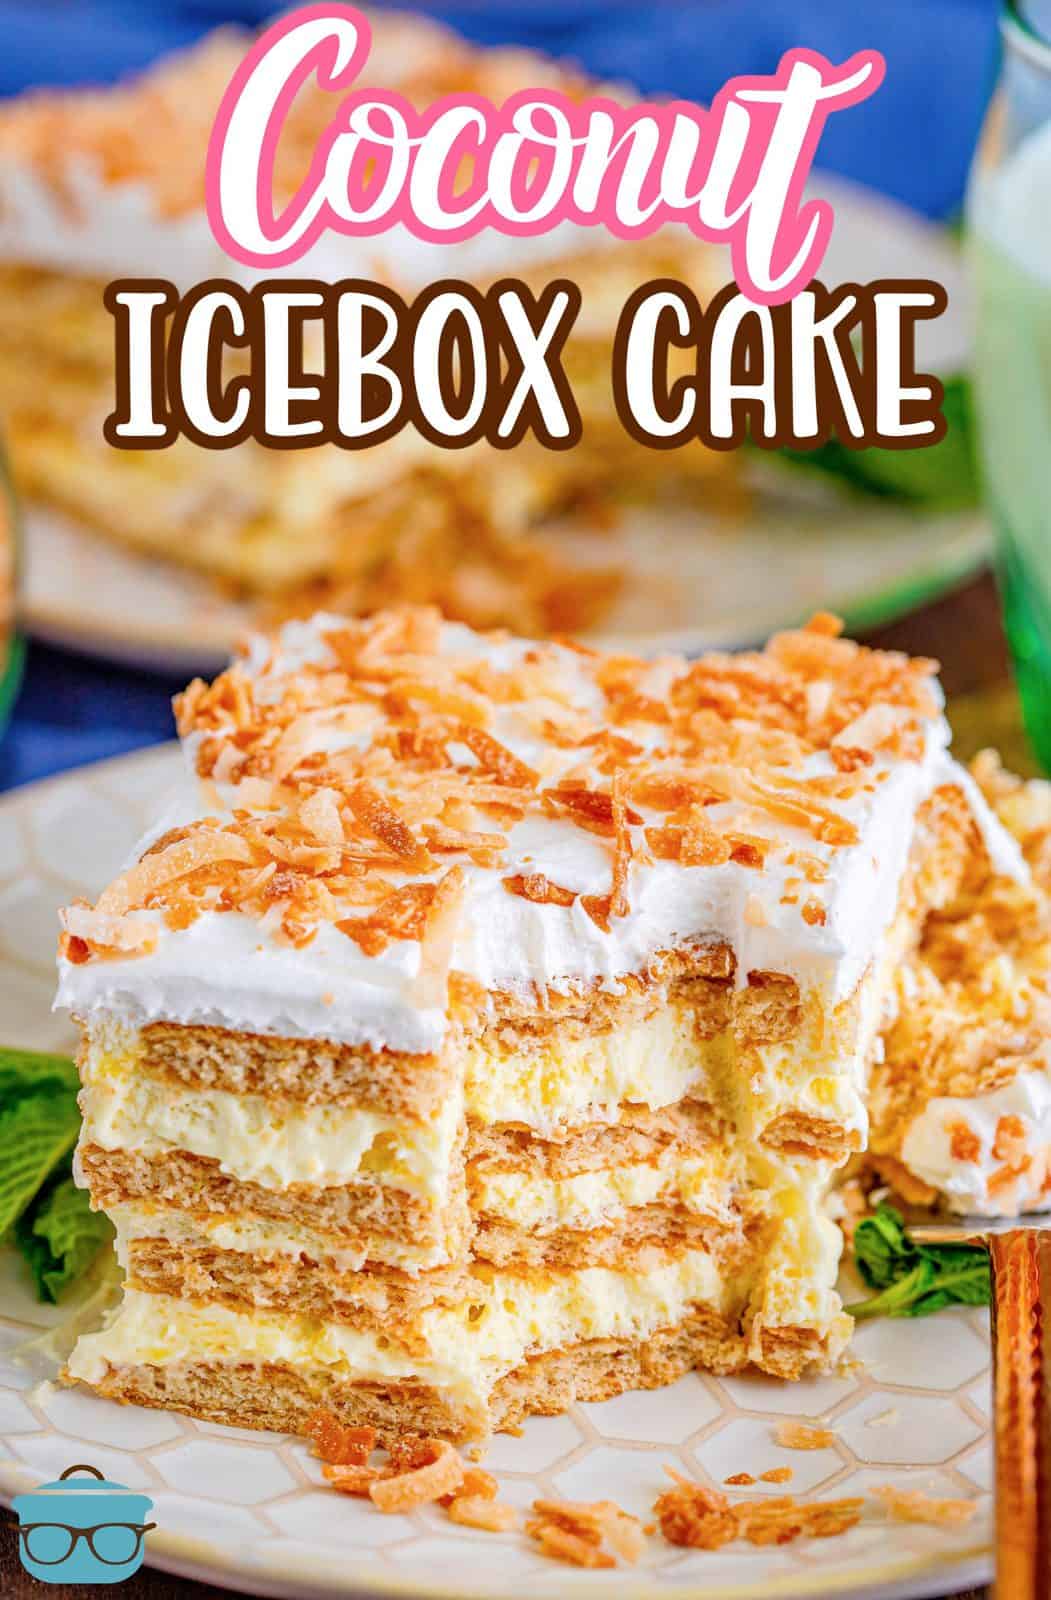 Pinterest image of slice of Coconut Icebox Cake with bite taken out of pice.